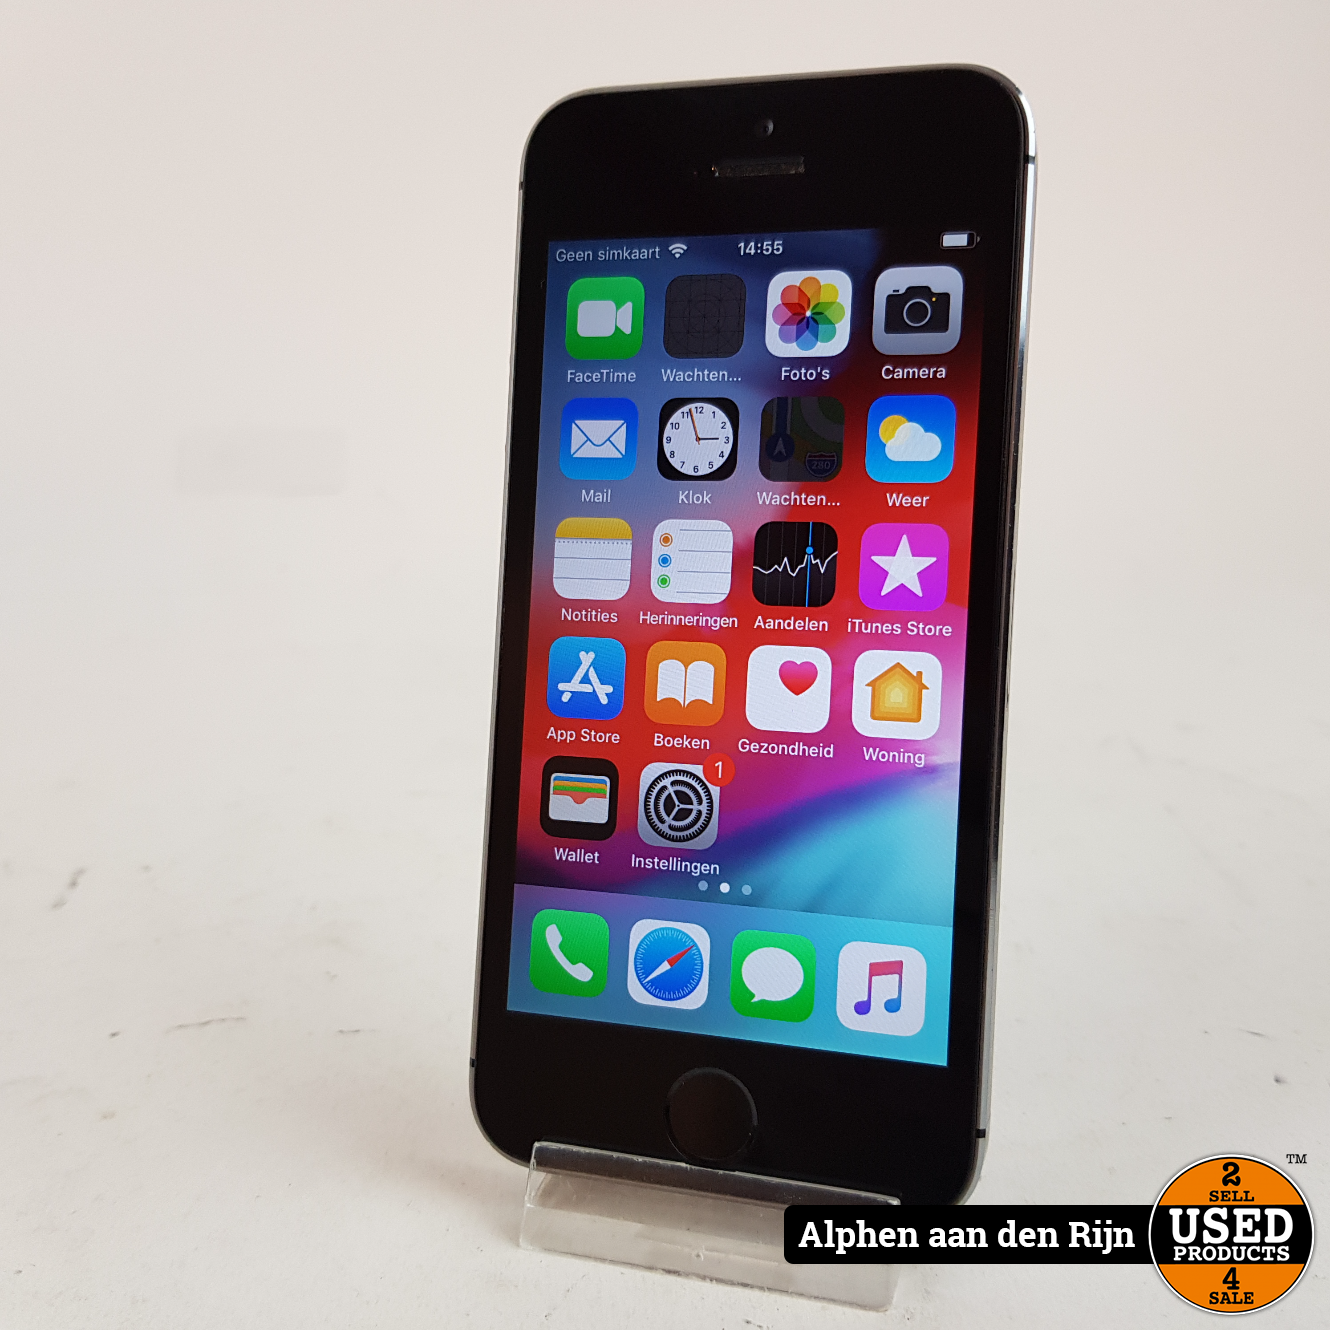 iPhone 5s 16gb Space gray Used Products Alphen den Rijn